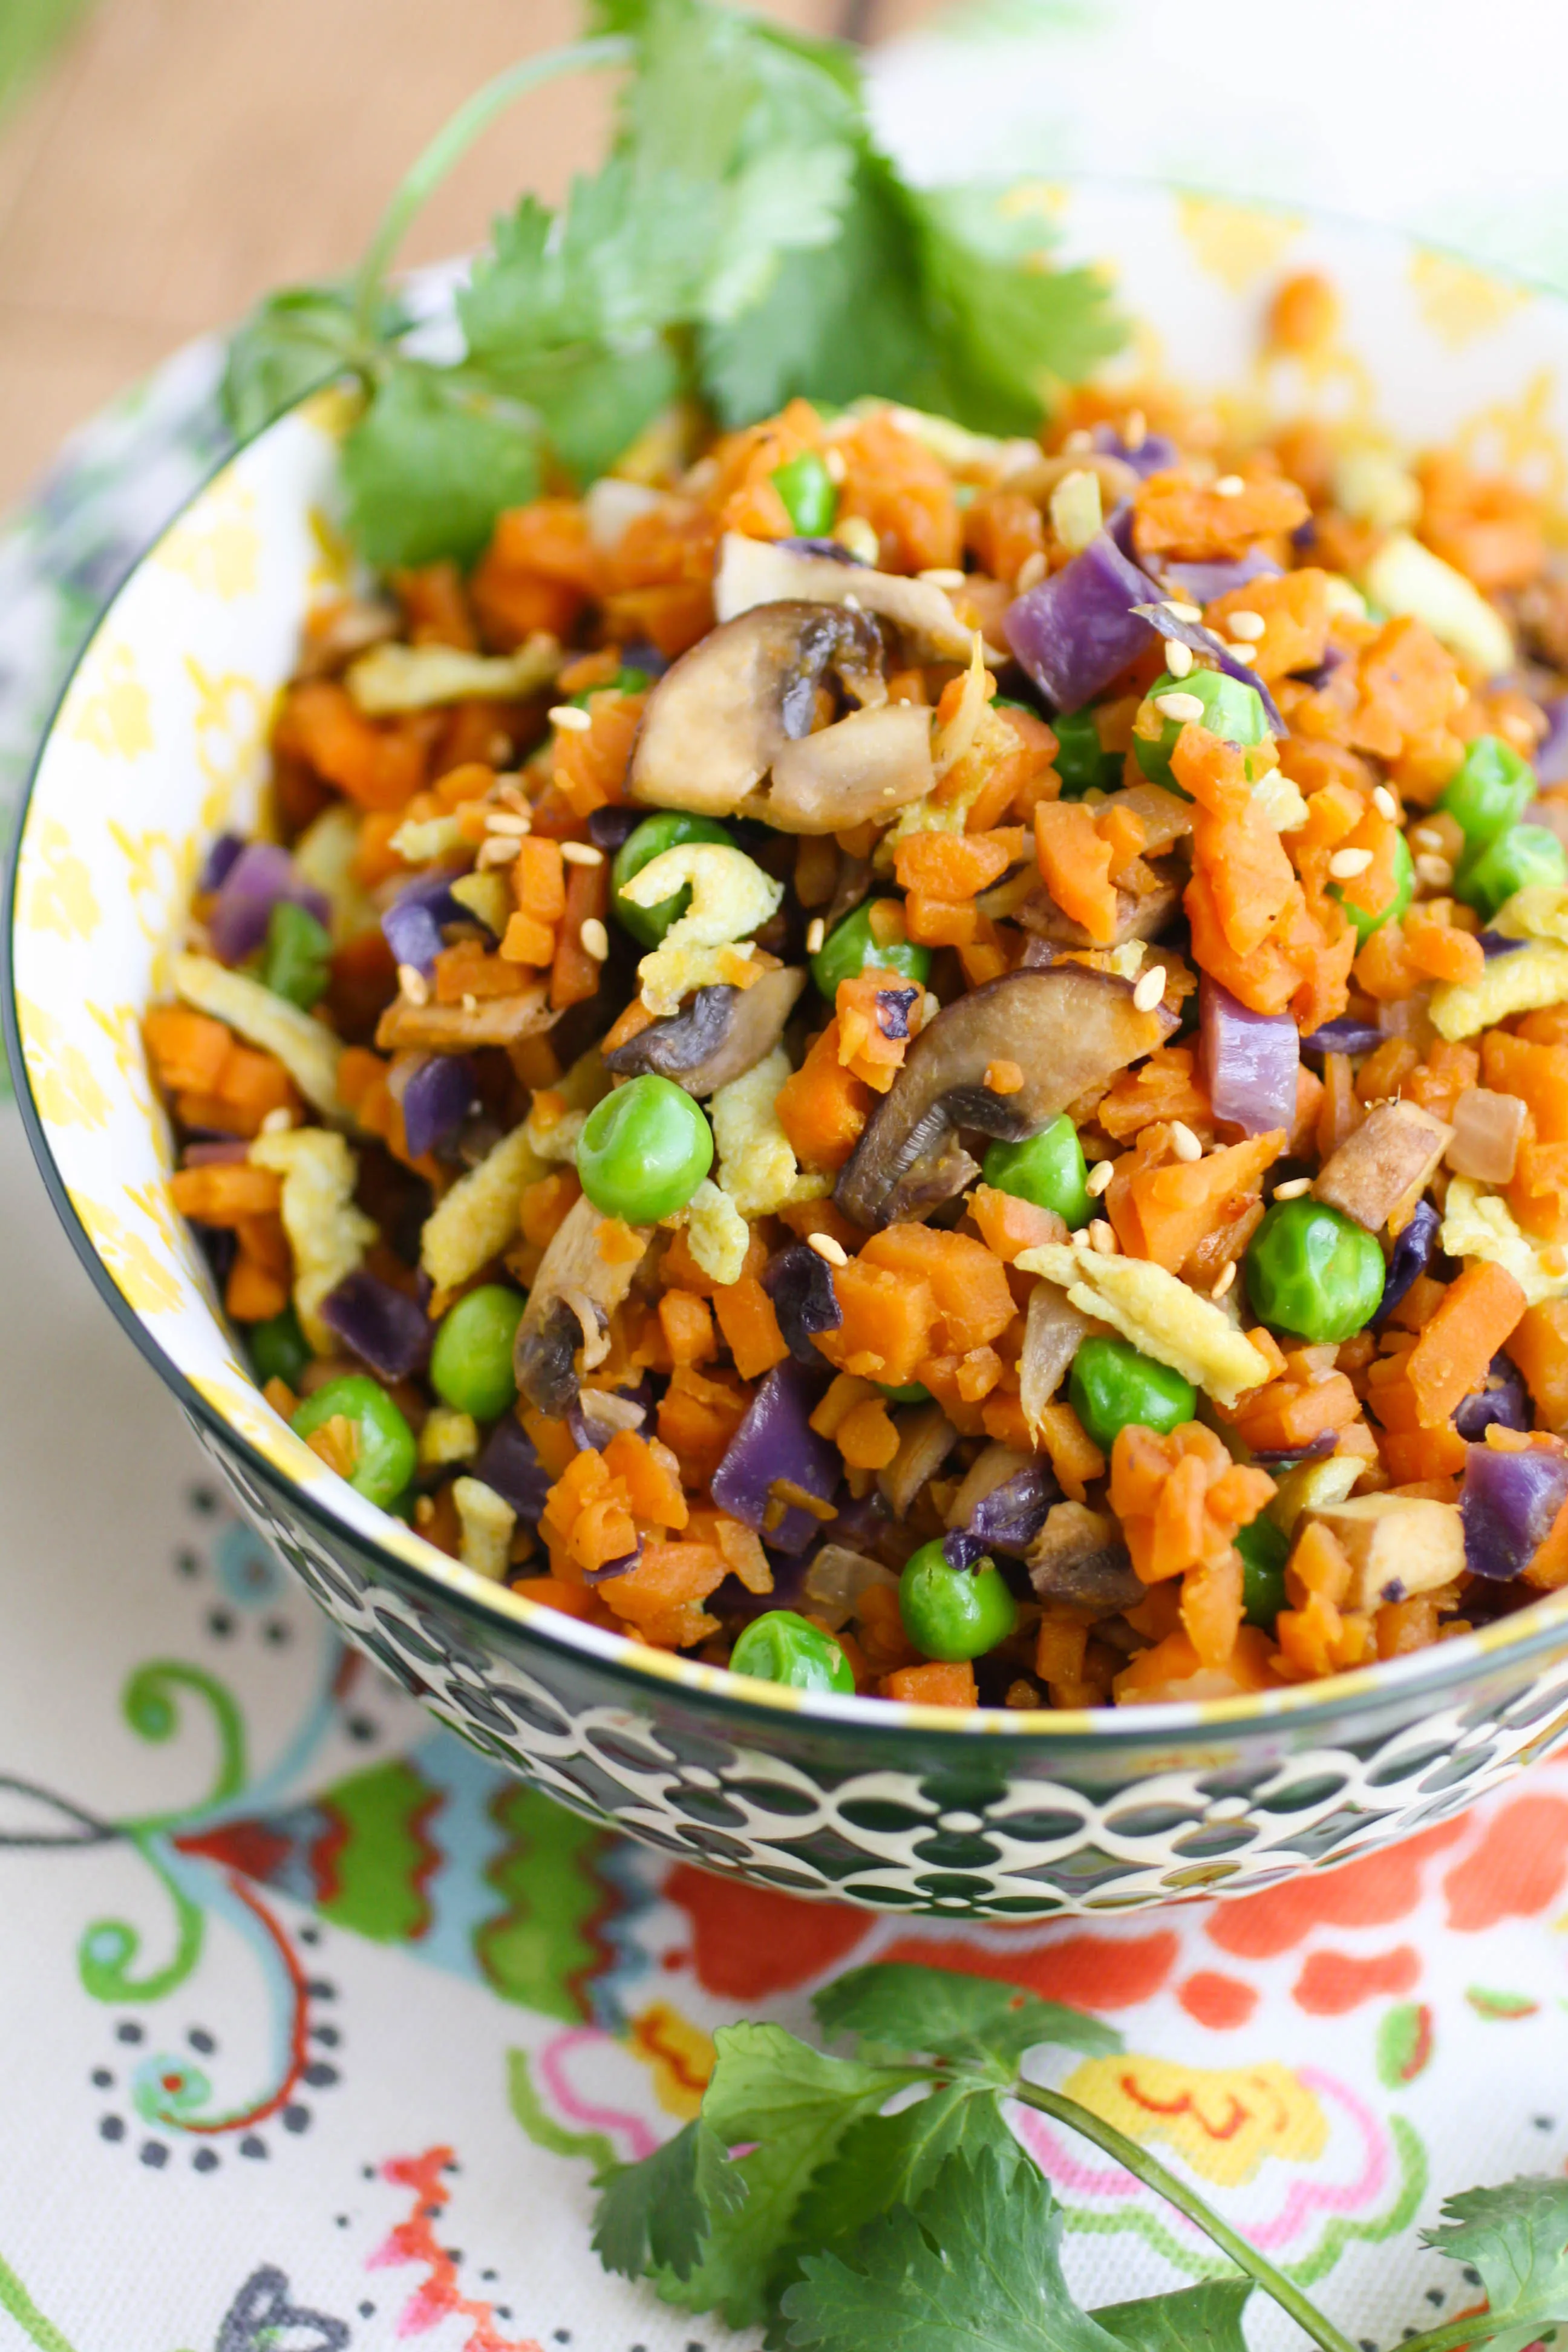 Sweet Potato "Fried Rice" is a fun and colorful dish your family will love! Try it as a healthy dish to serve on a Meatless Monday, too!